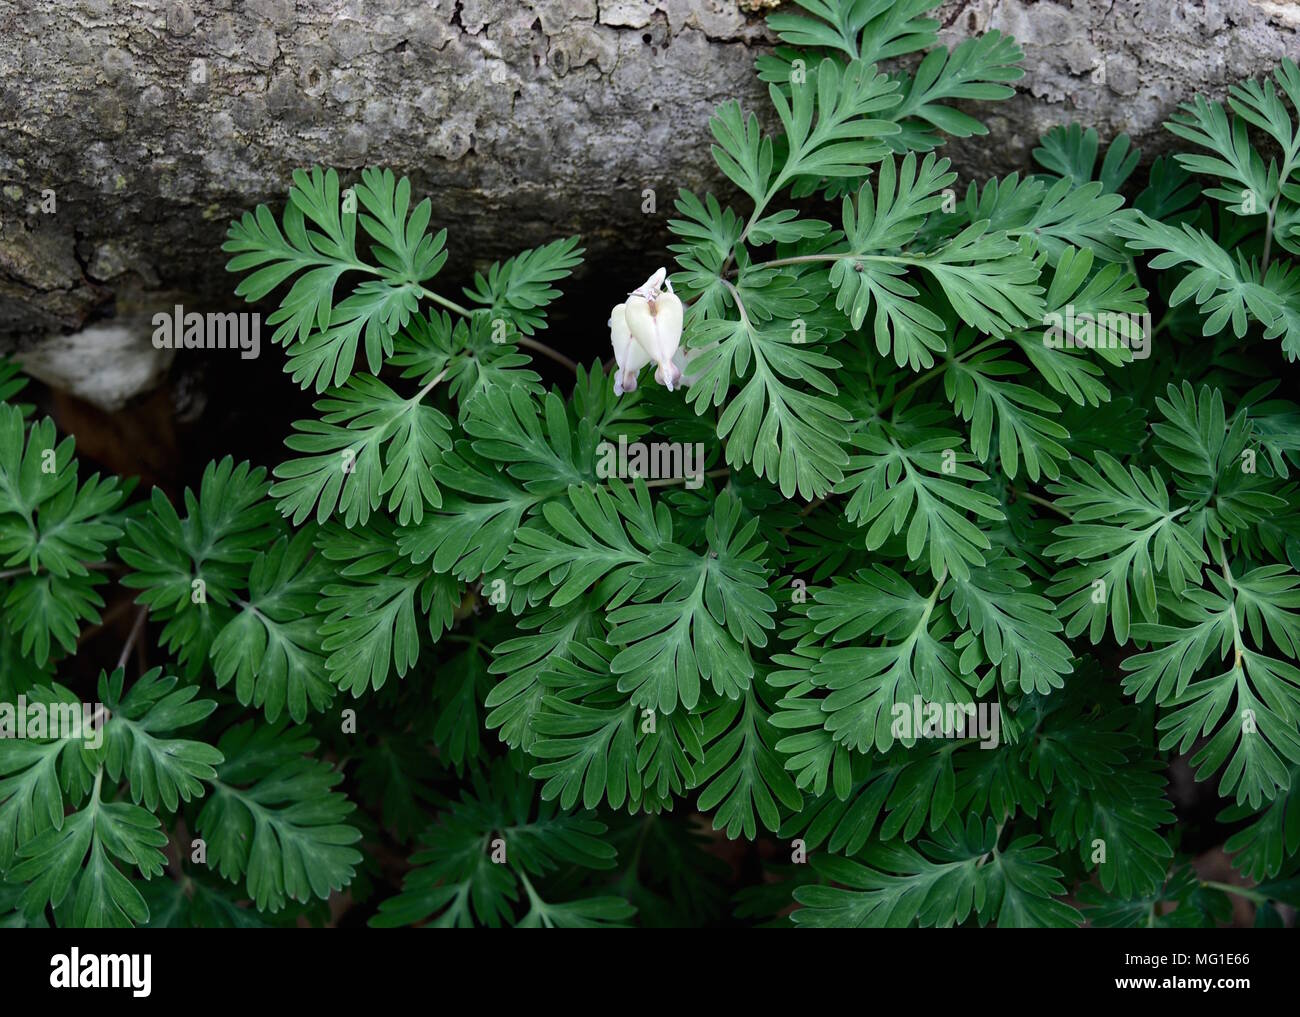 Bright white flowers of squirrel corn with highly dissected green leaves in a spring forest. Stock Photo